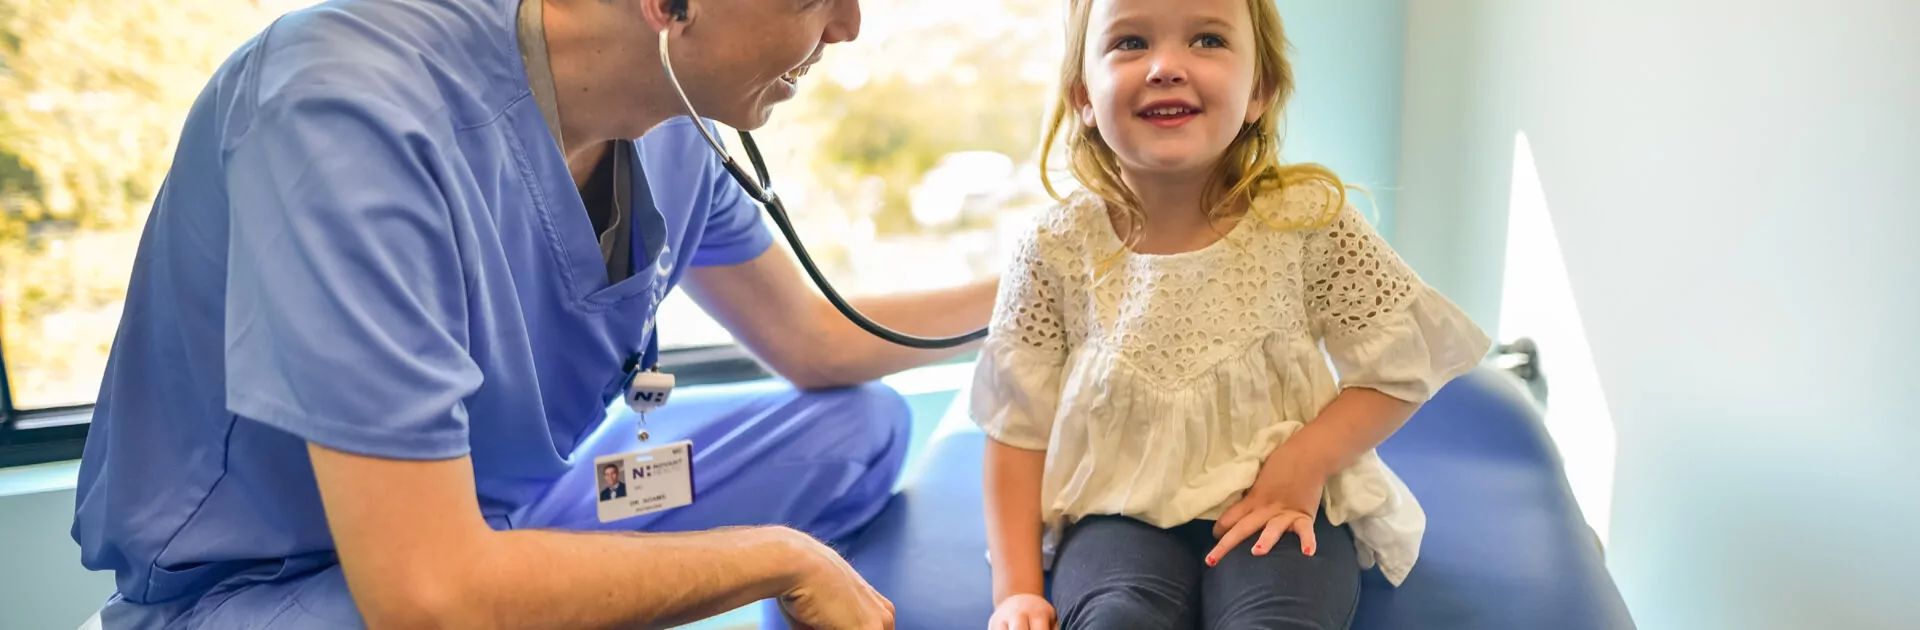 Male doctor listens to smiling child's heartbeat.